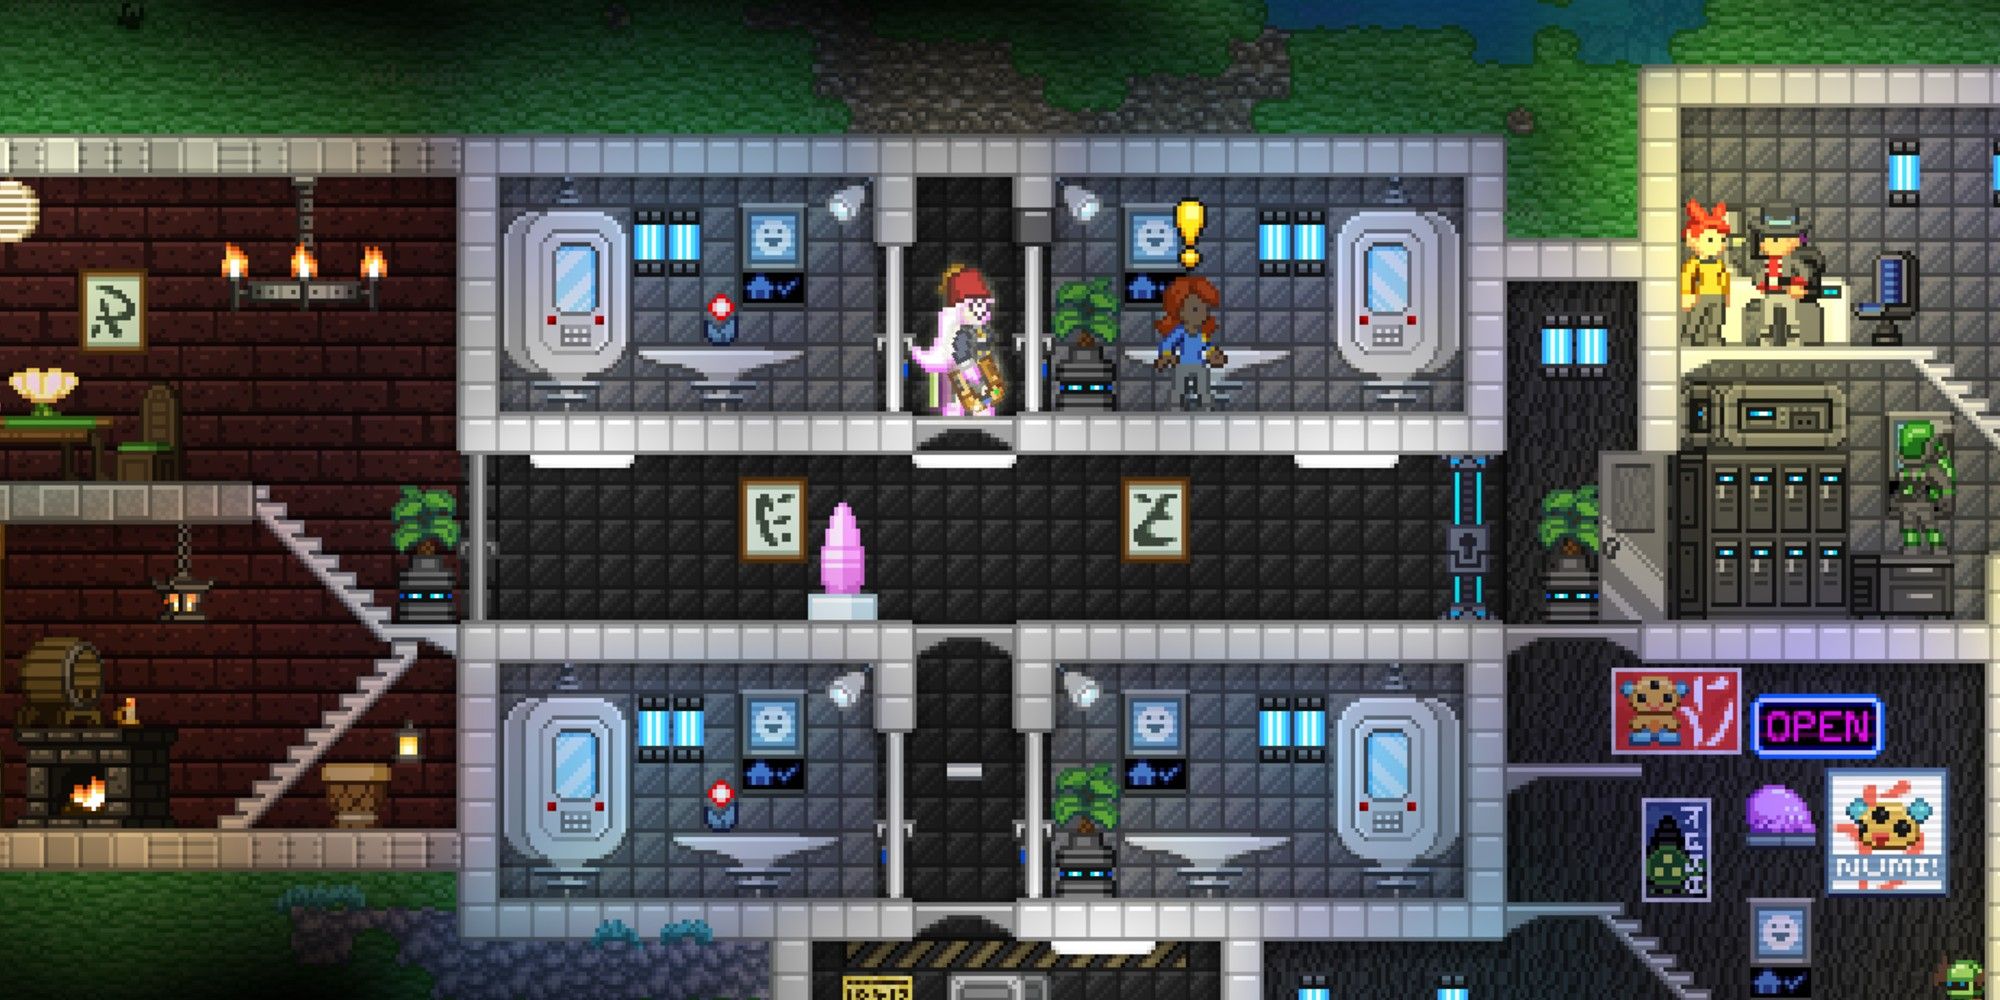 how to expand ship starbound